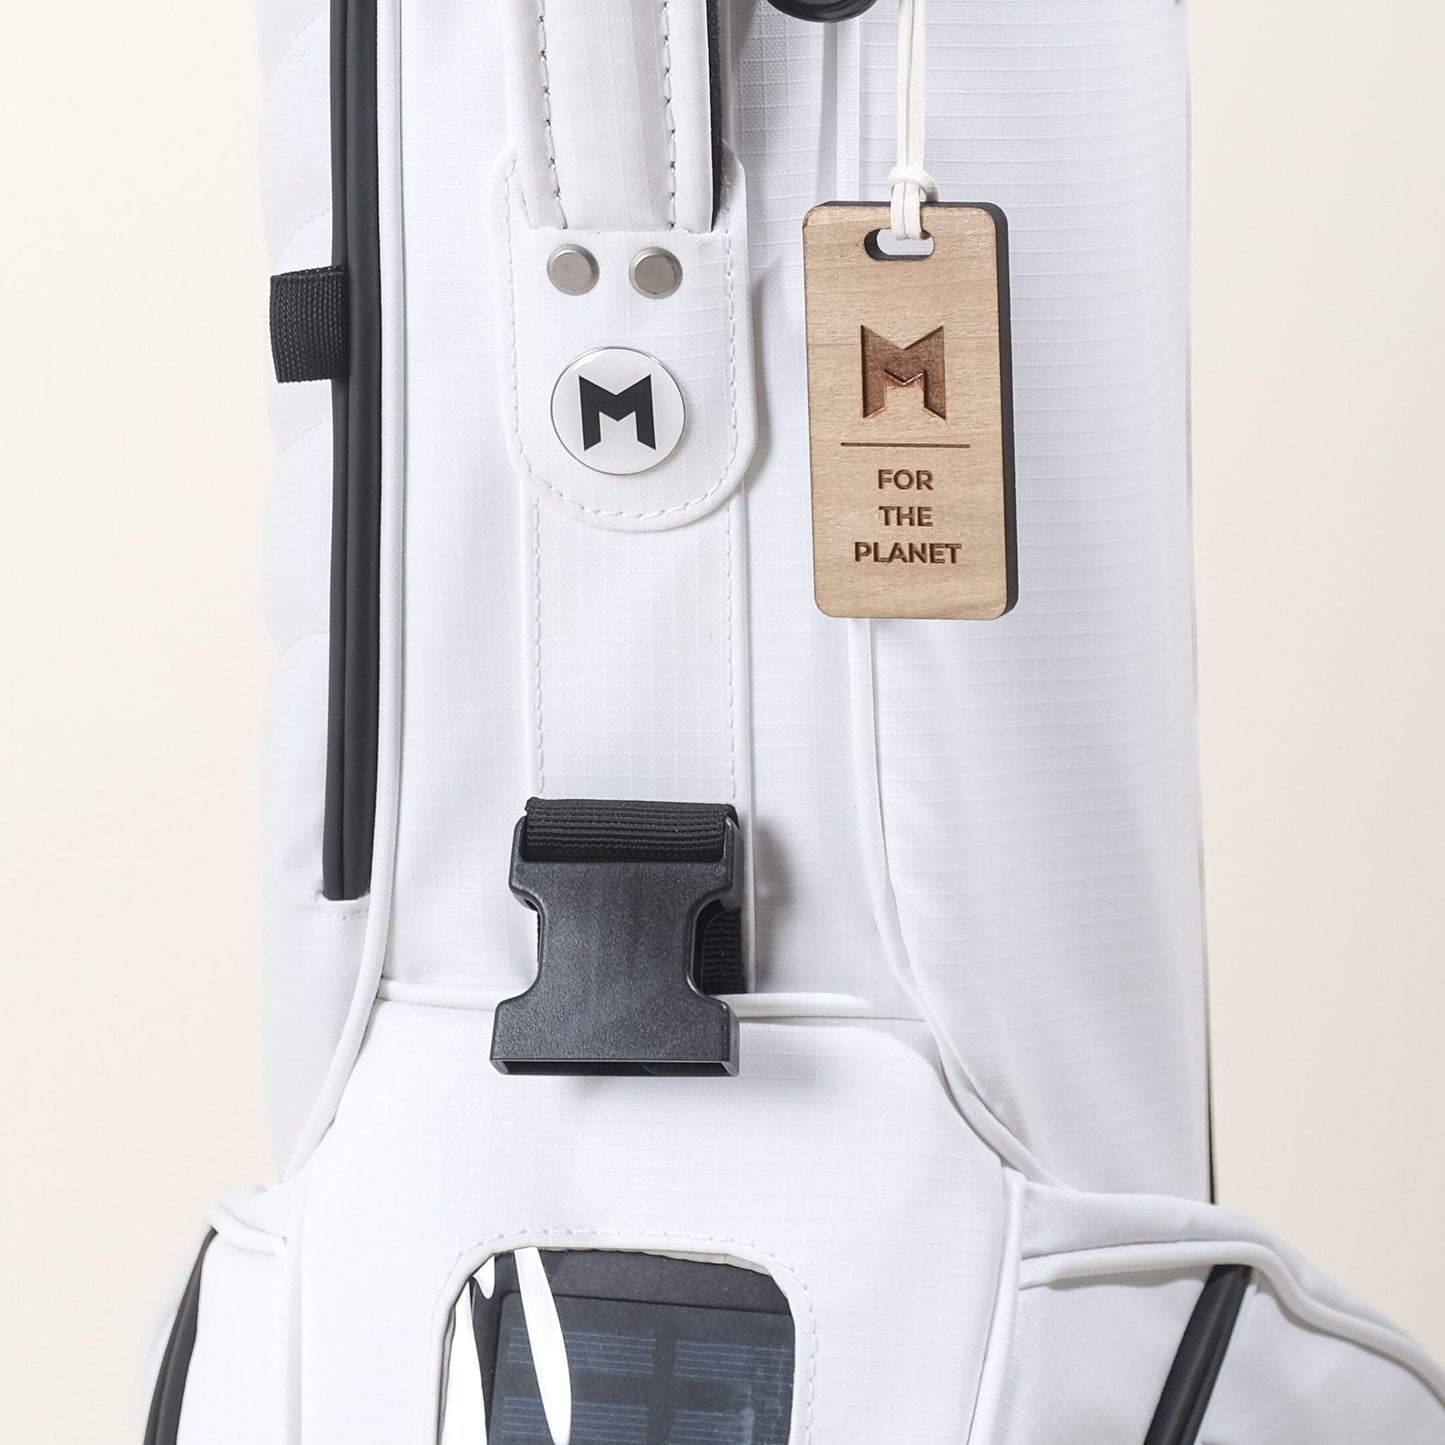 MNML GOLF's new MR1 bag features The Number Thirty Three logos hand painted on the ball pocket and side panel.